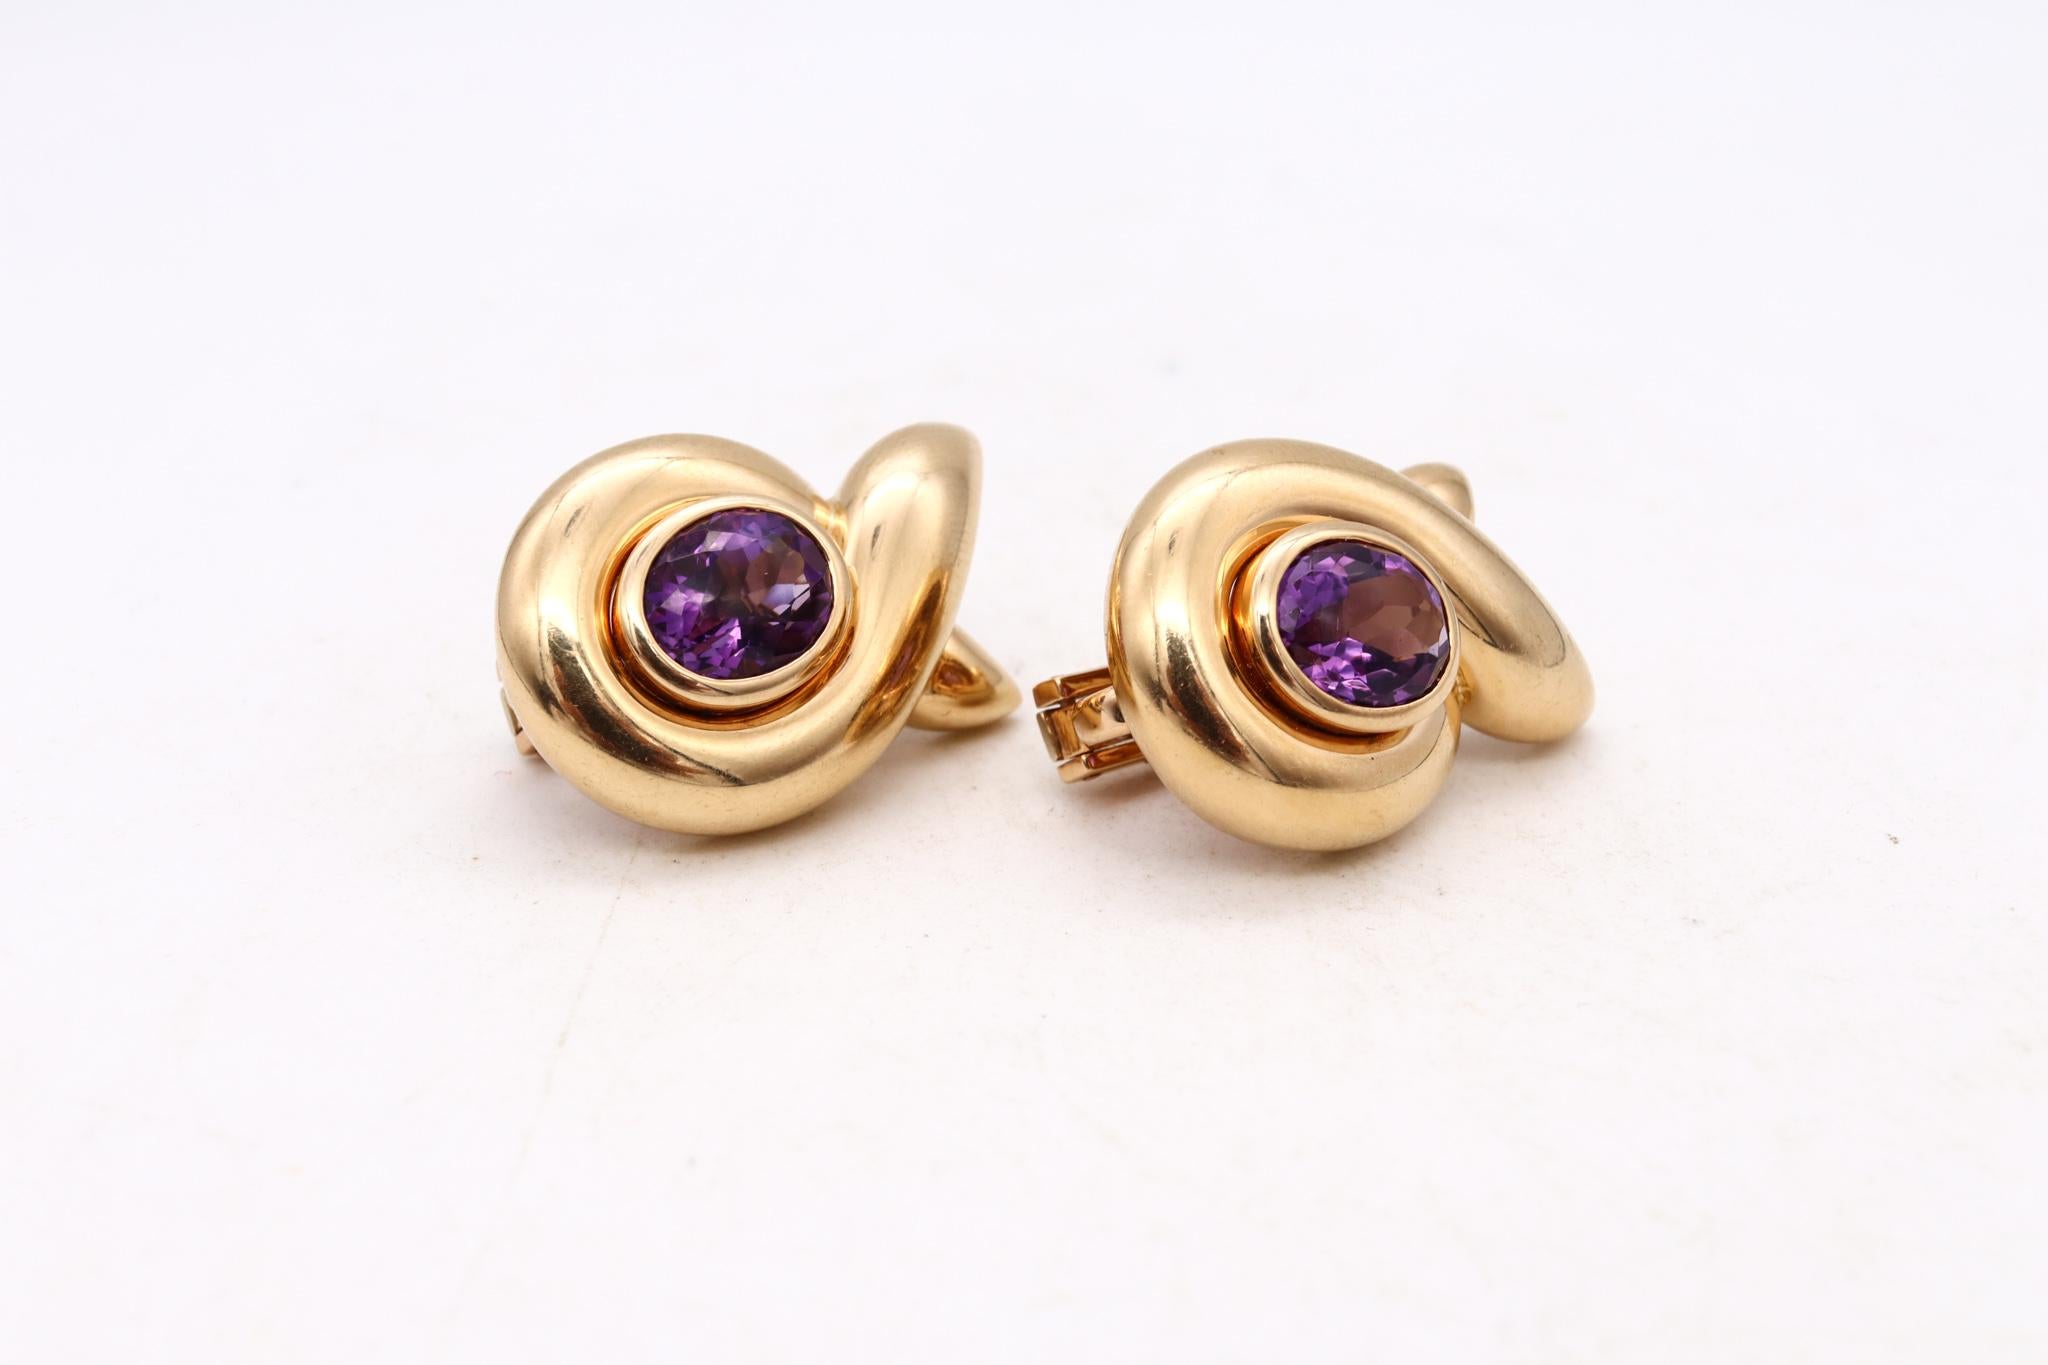 Modernist Verdura Milan 18Kt Yellow Gold Earrings with 11.8 Cts of Vivid Purple Amethyst For Sale